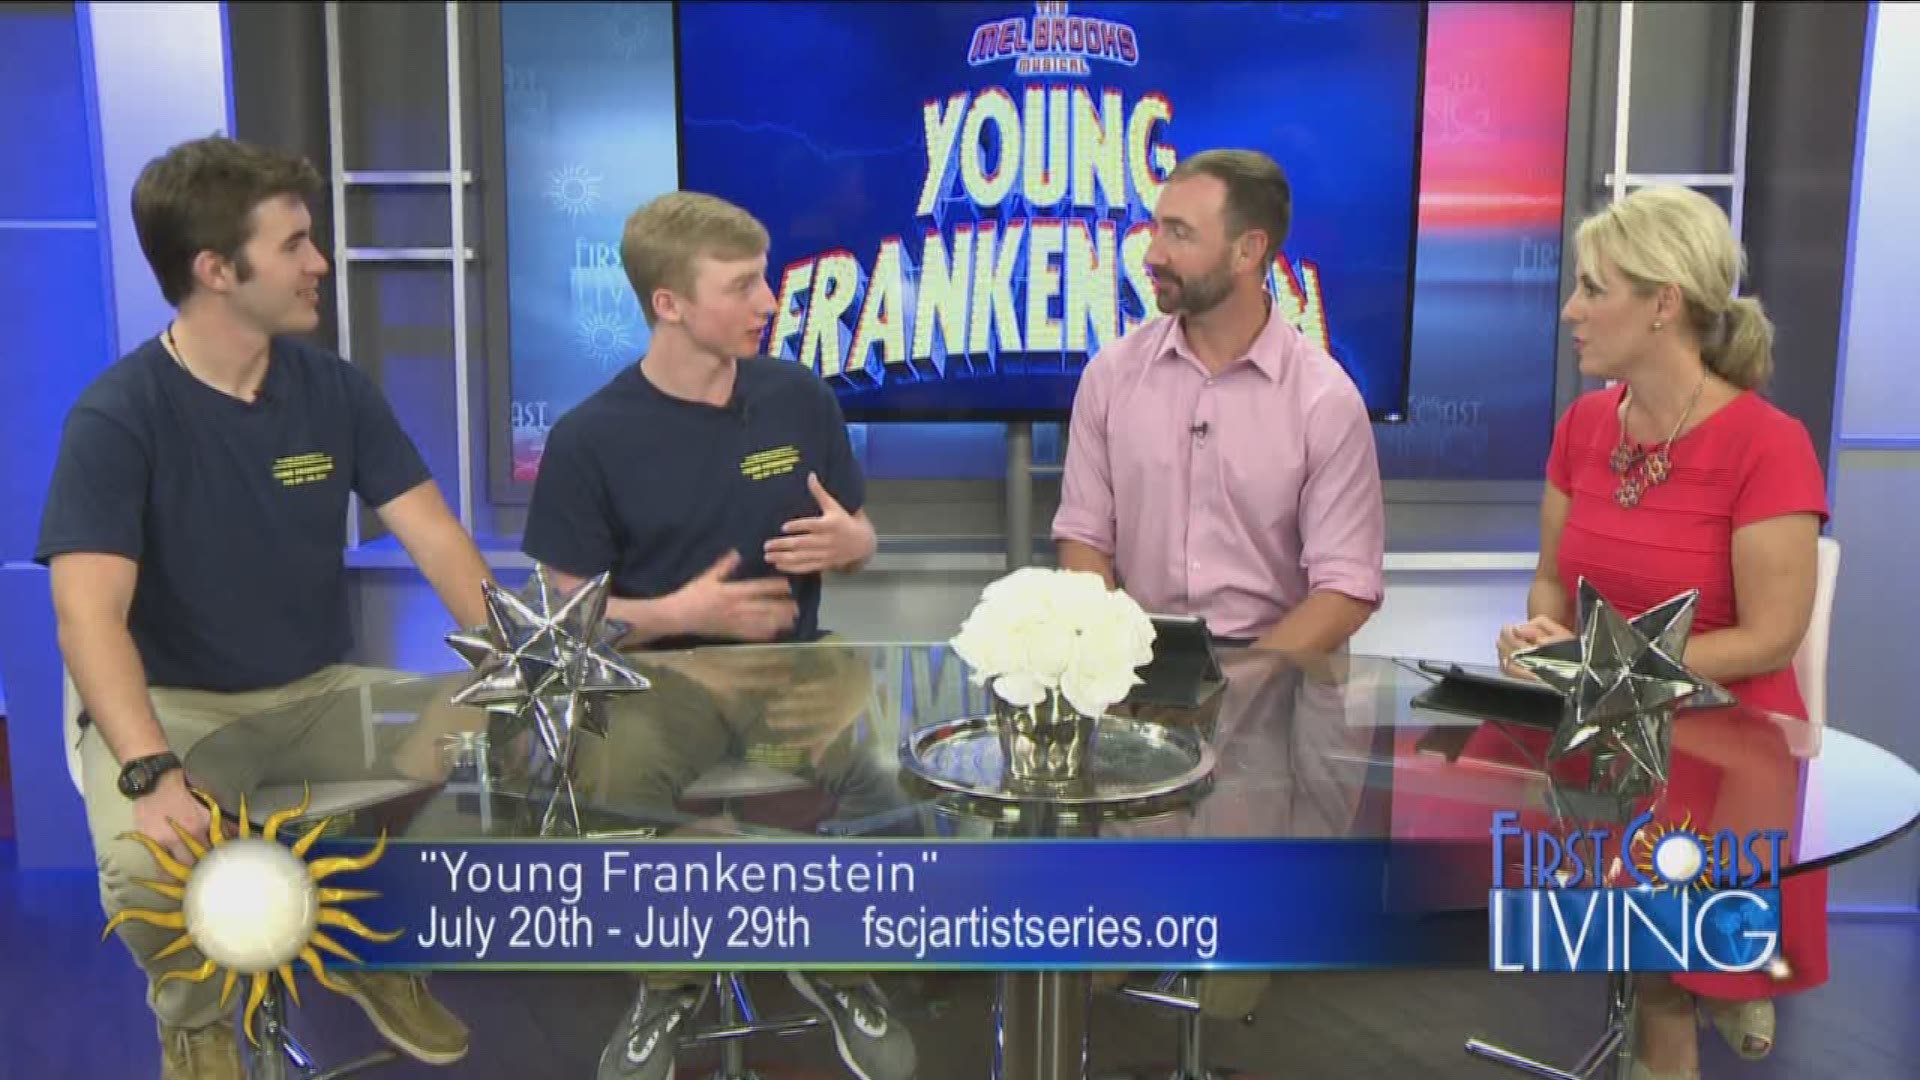 See "Young Frankenstein" July 20th - July 29th.